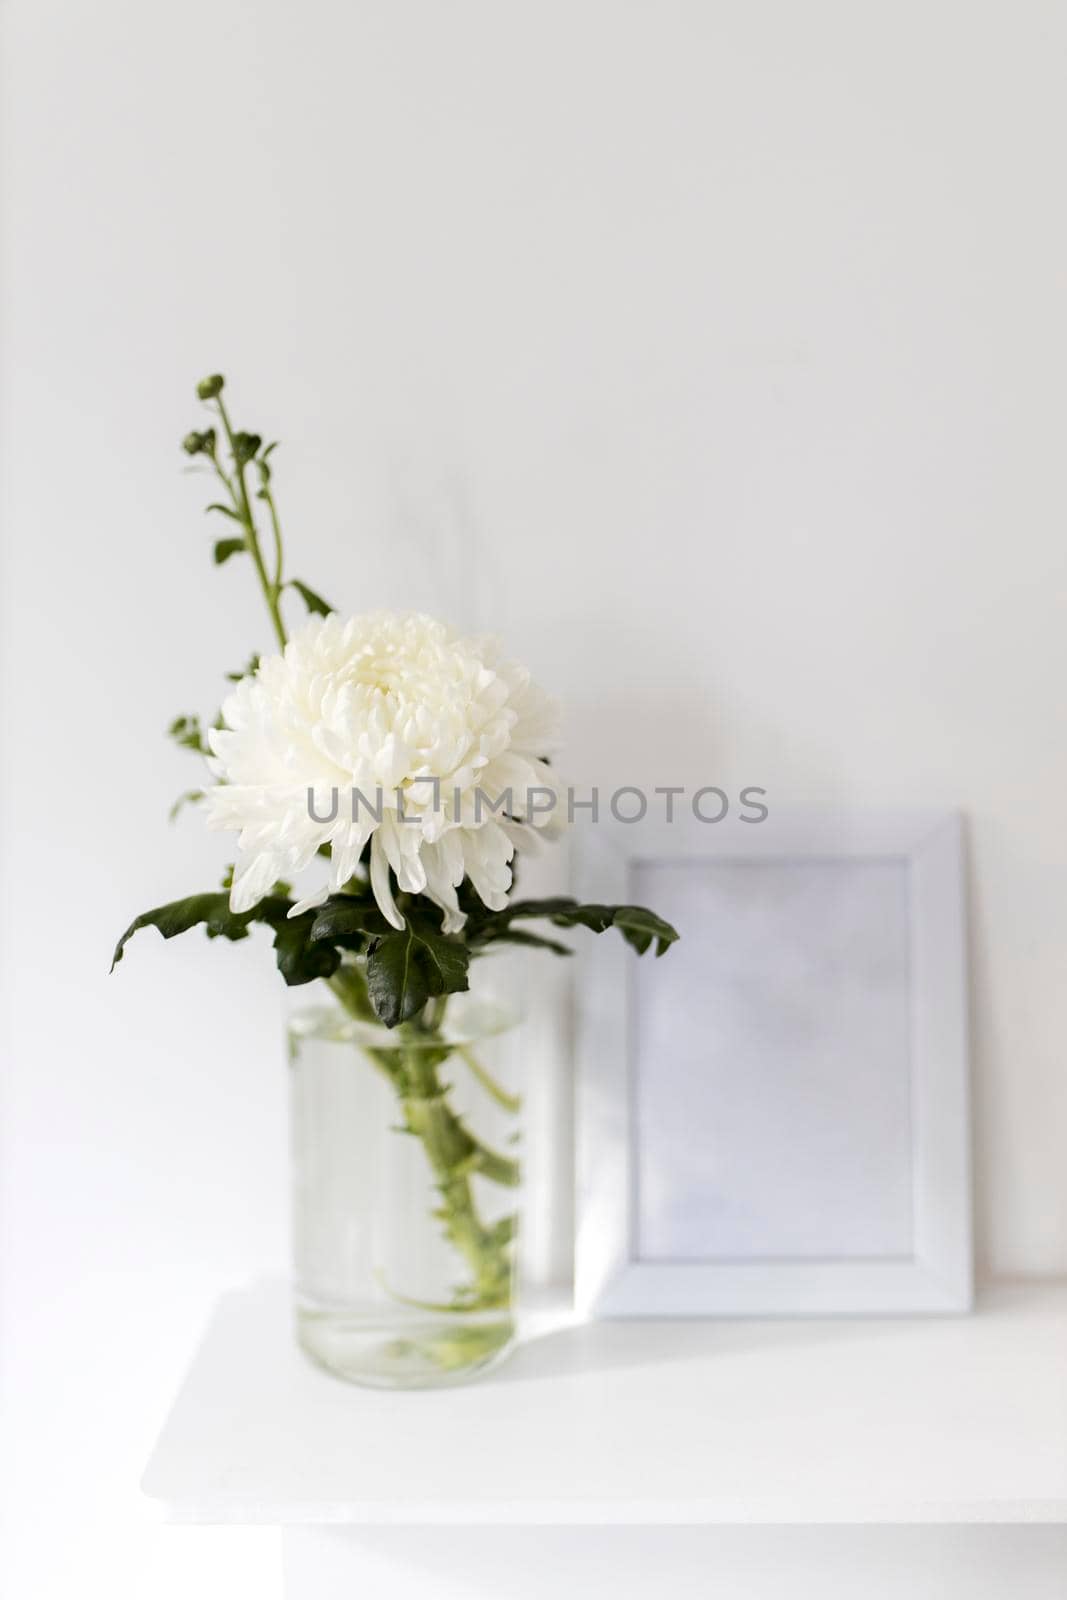 Large chrysanthemum in a glass vase. Photo frame with place for text, Office decoration. Copy space. Place for text